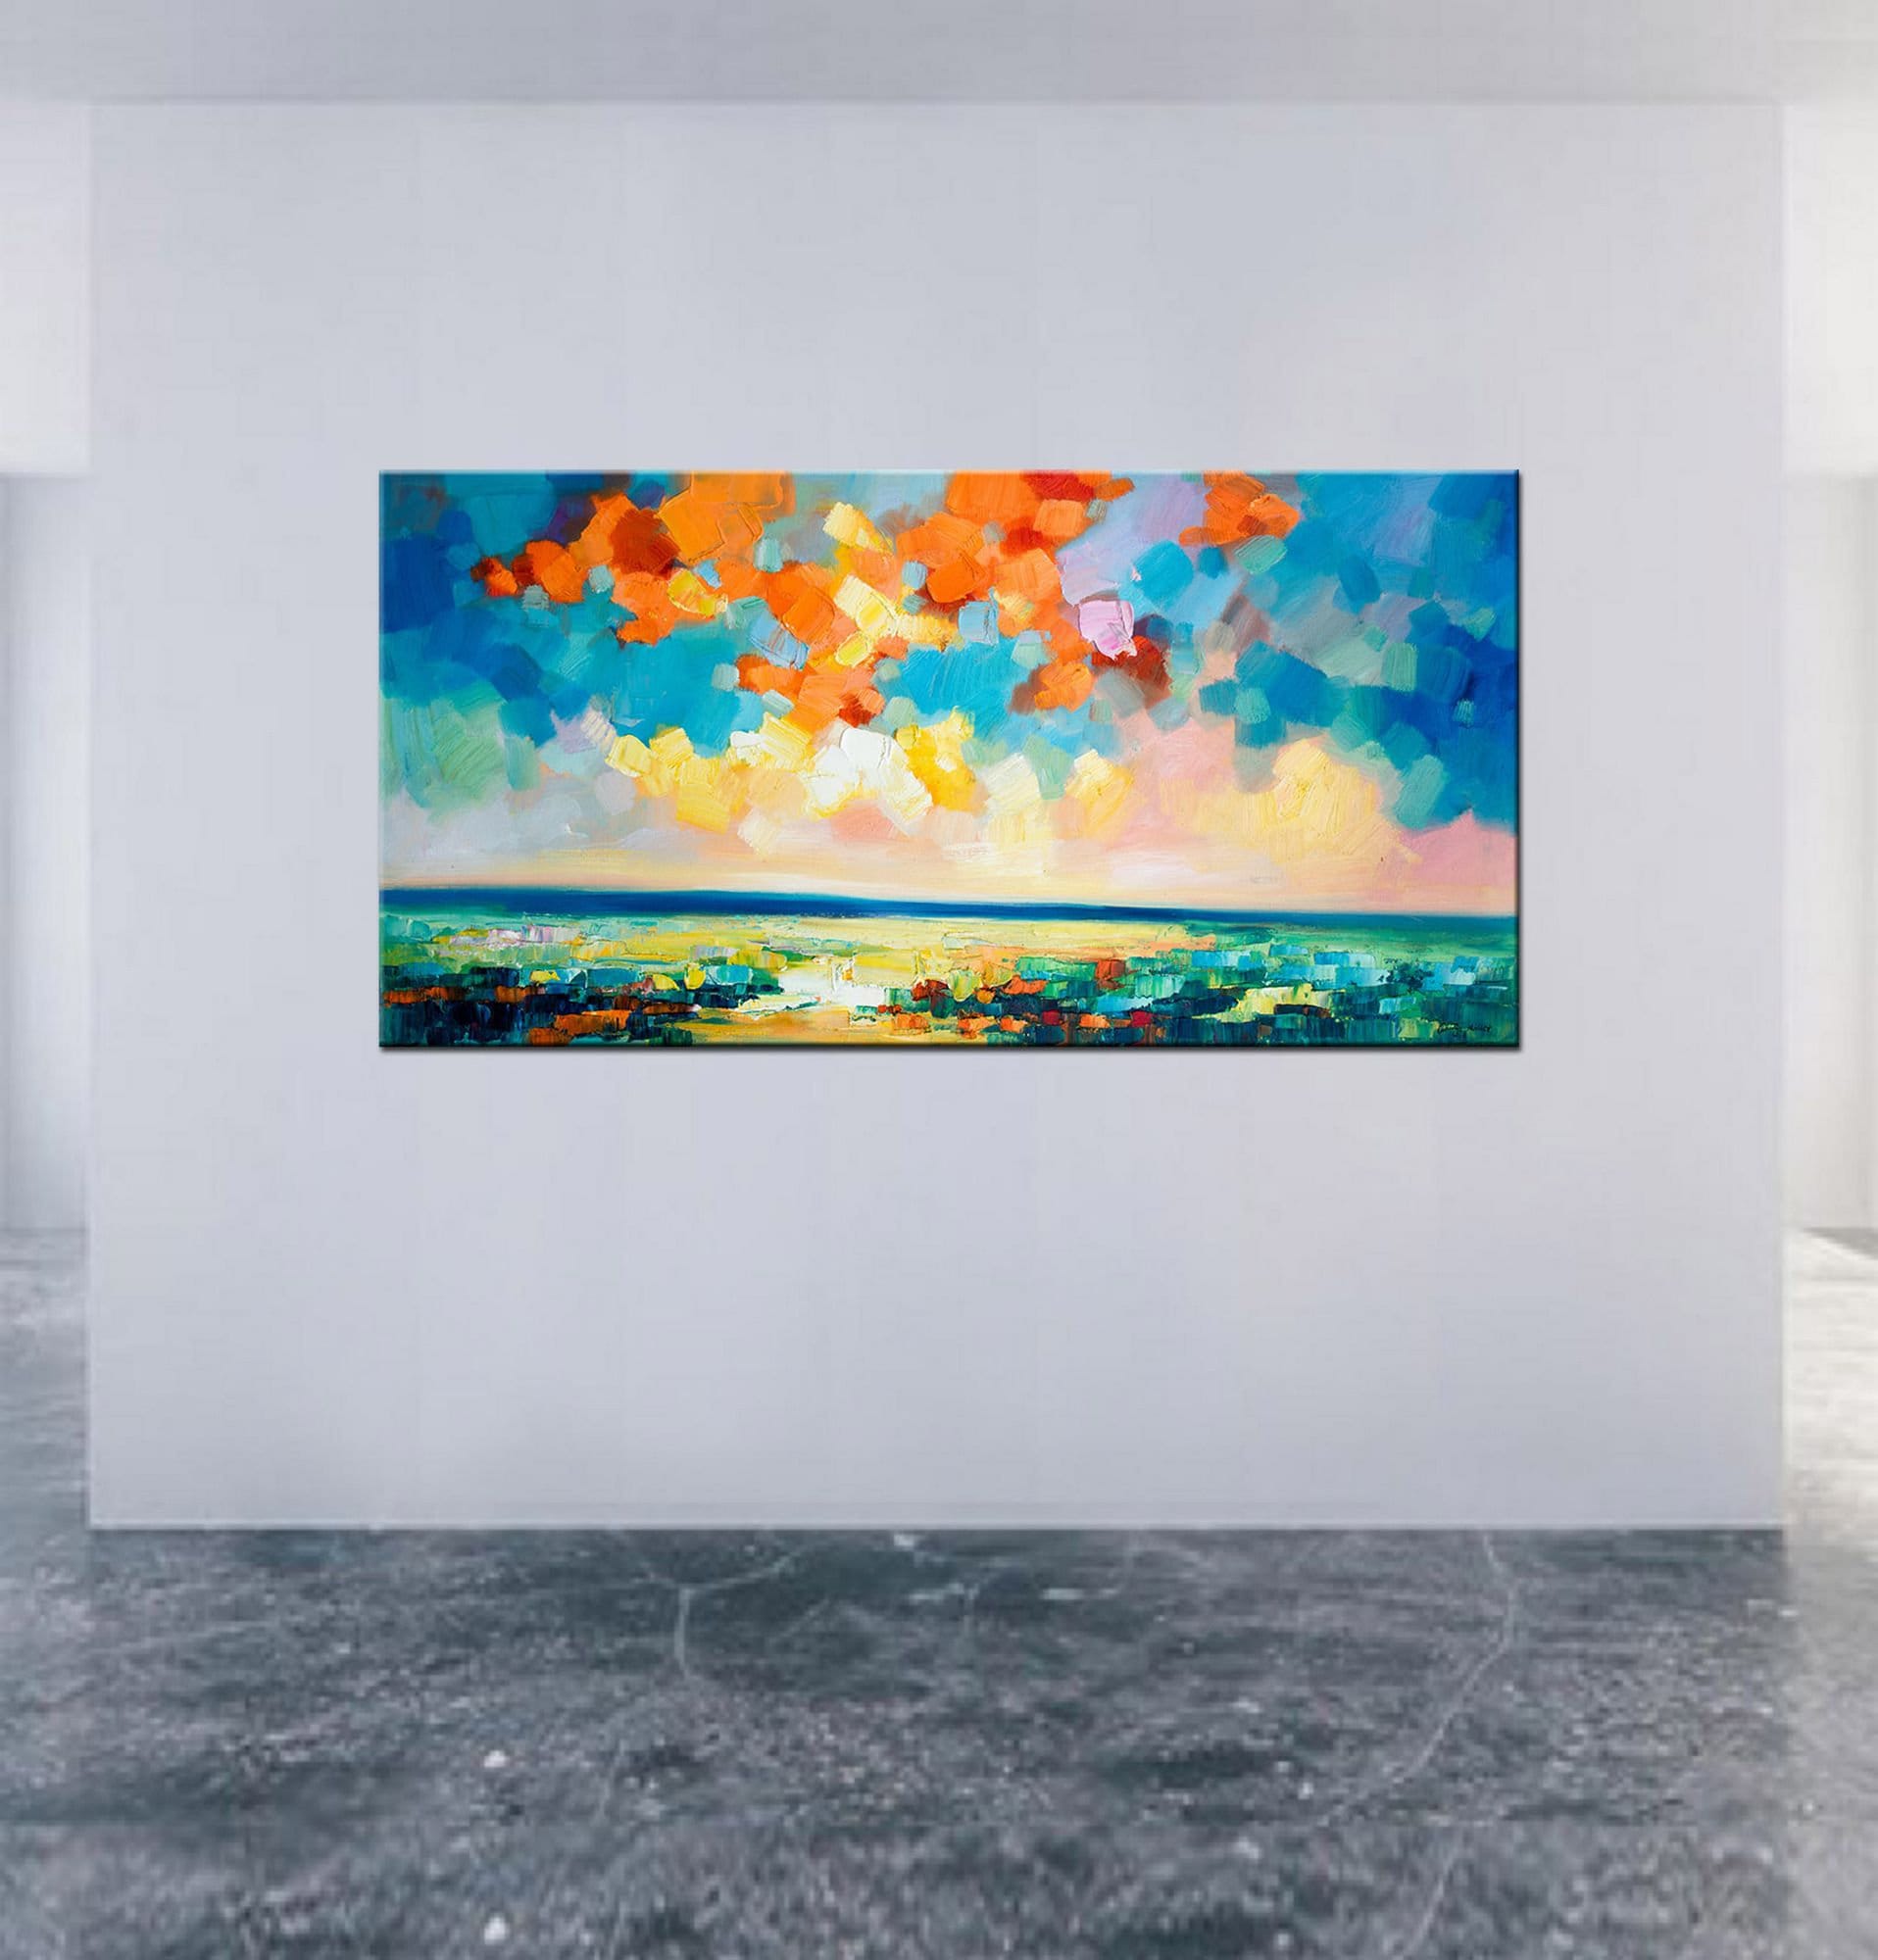 Large Art, Bedroom Art, Abstract Art, Original Artwork, Abstract Landscape Painting, Modern Painting, Abstract Canvas Art, Wall Decor